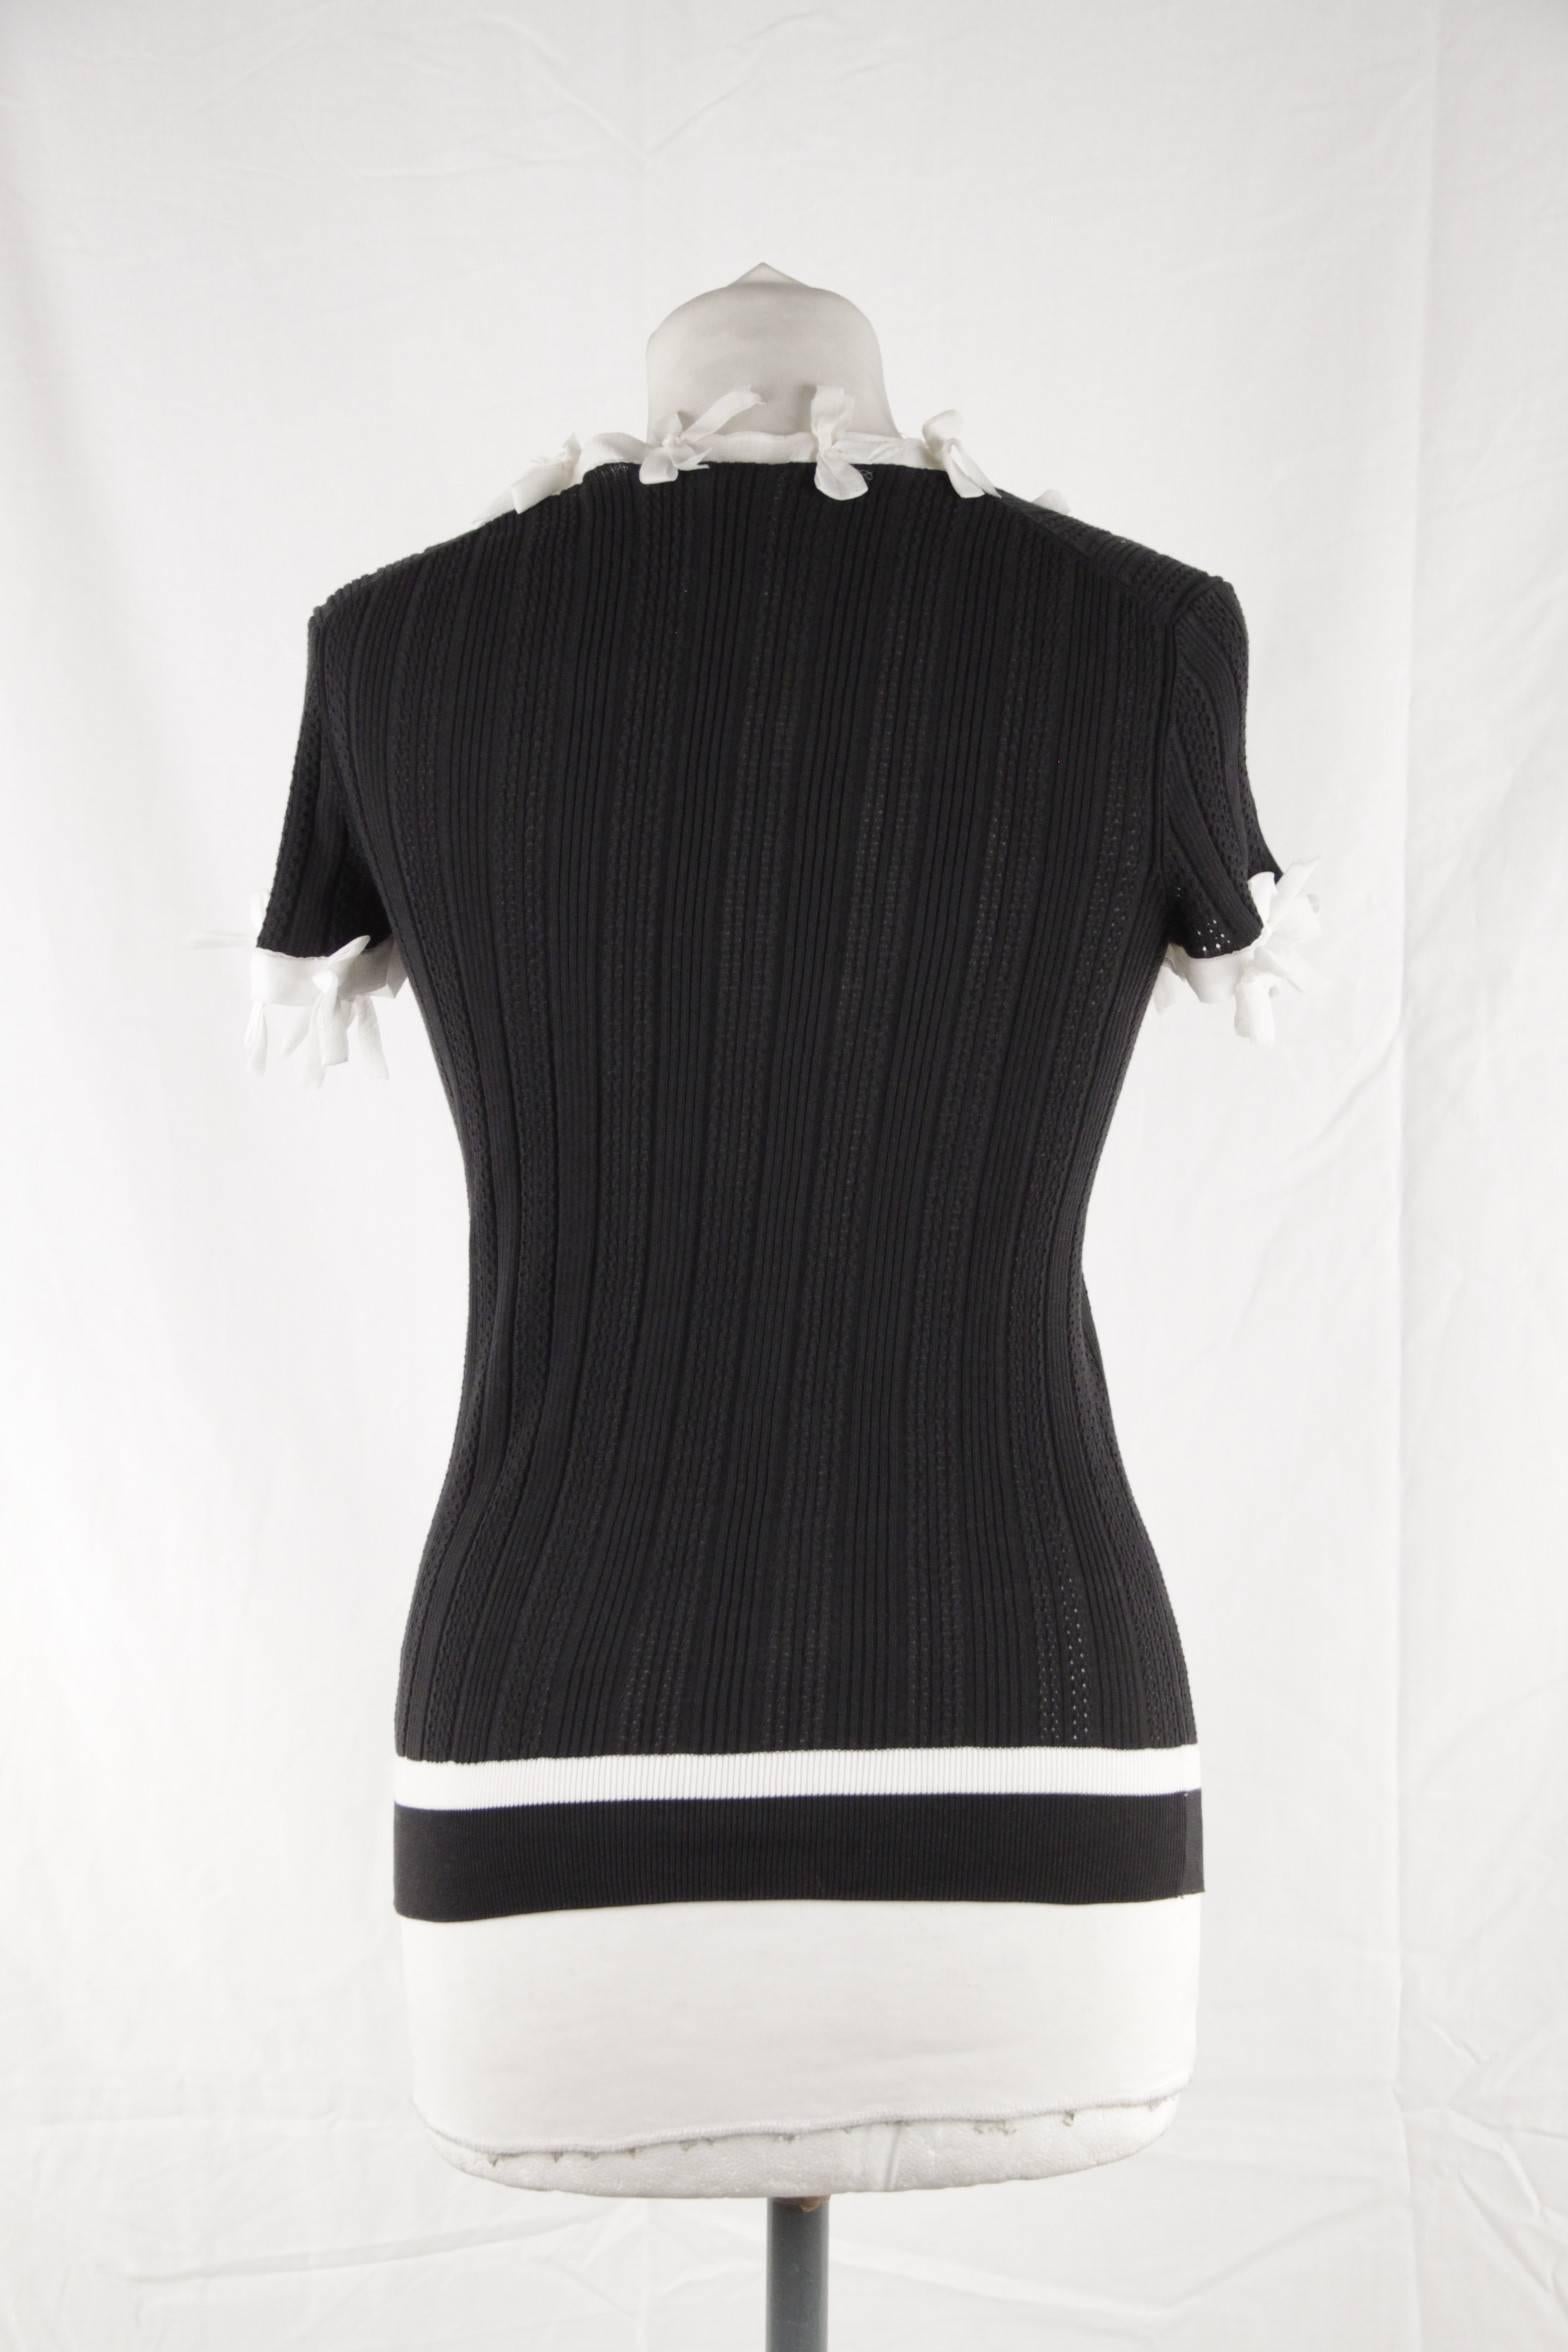 CHANEL Black Cotton KNIT TOP Short Sleeve with BOWS Detailing SIZE 38 In Good Condition In Rome, Rome